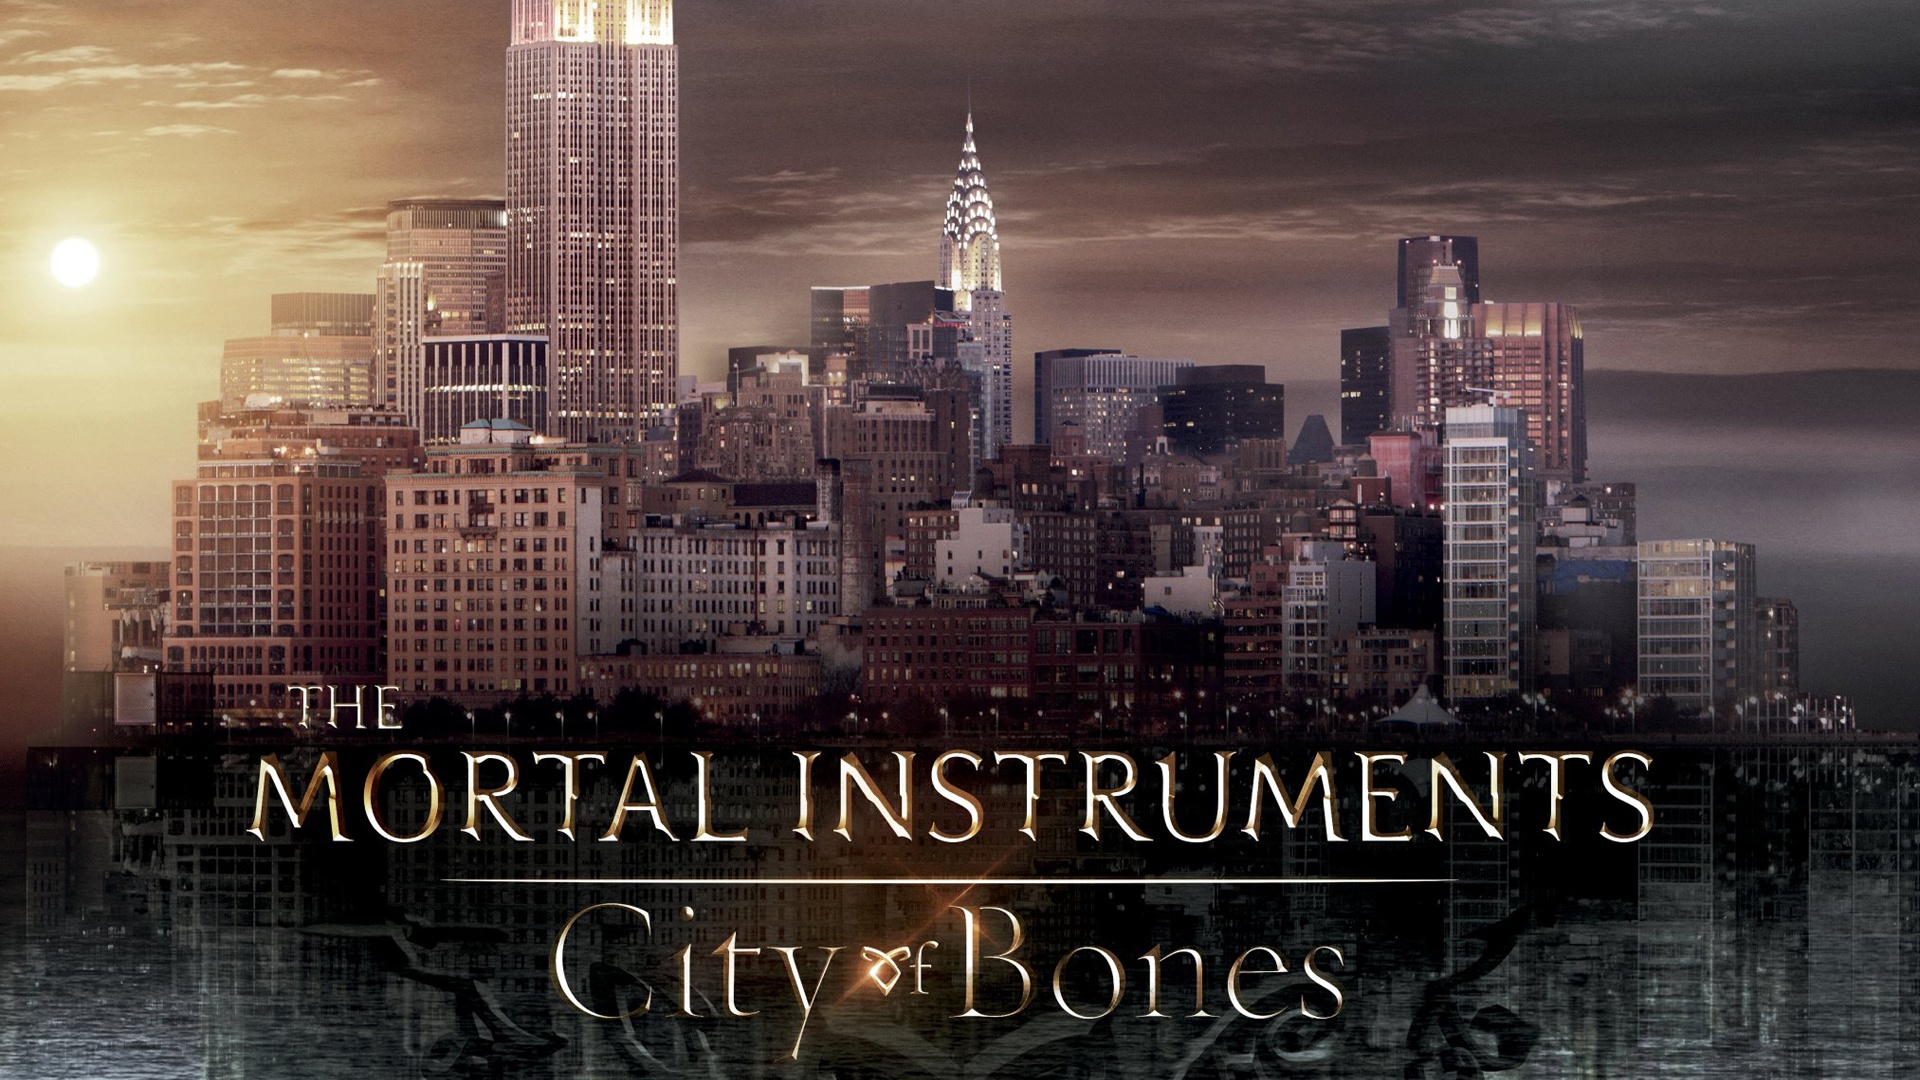 Movies Shows Books The Mortal Instruments City Of Bones Movie